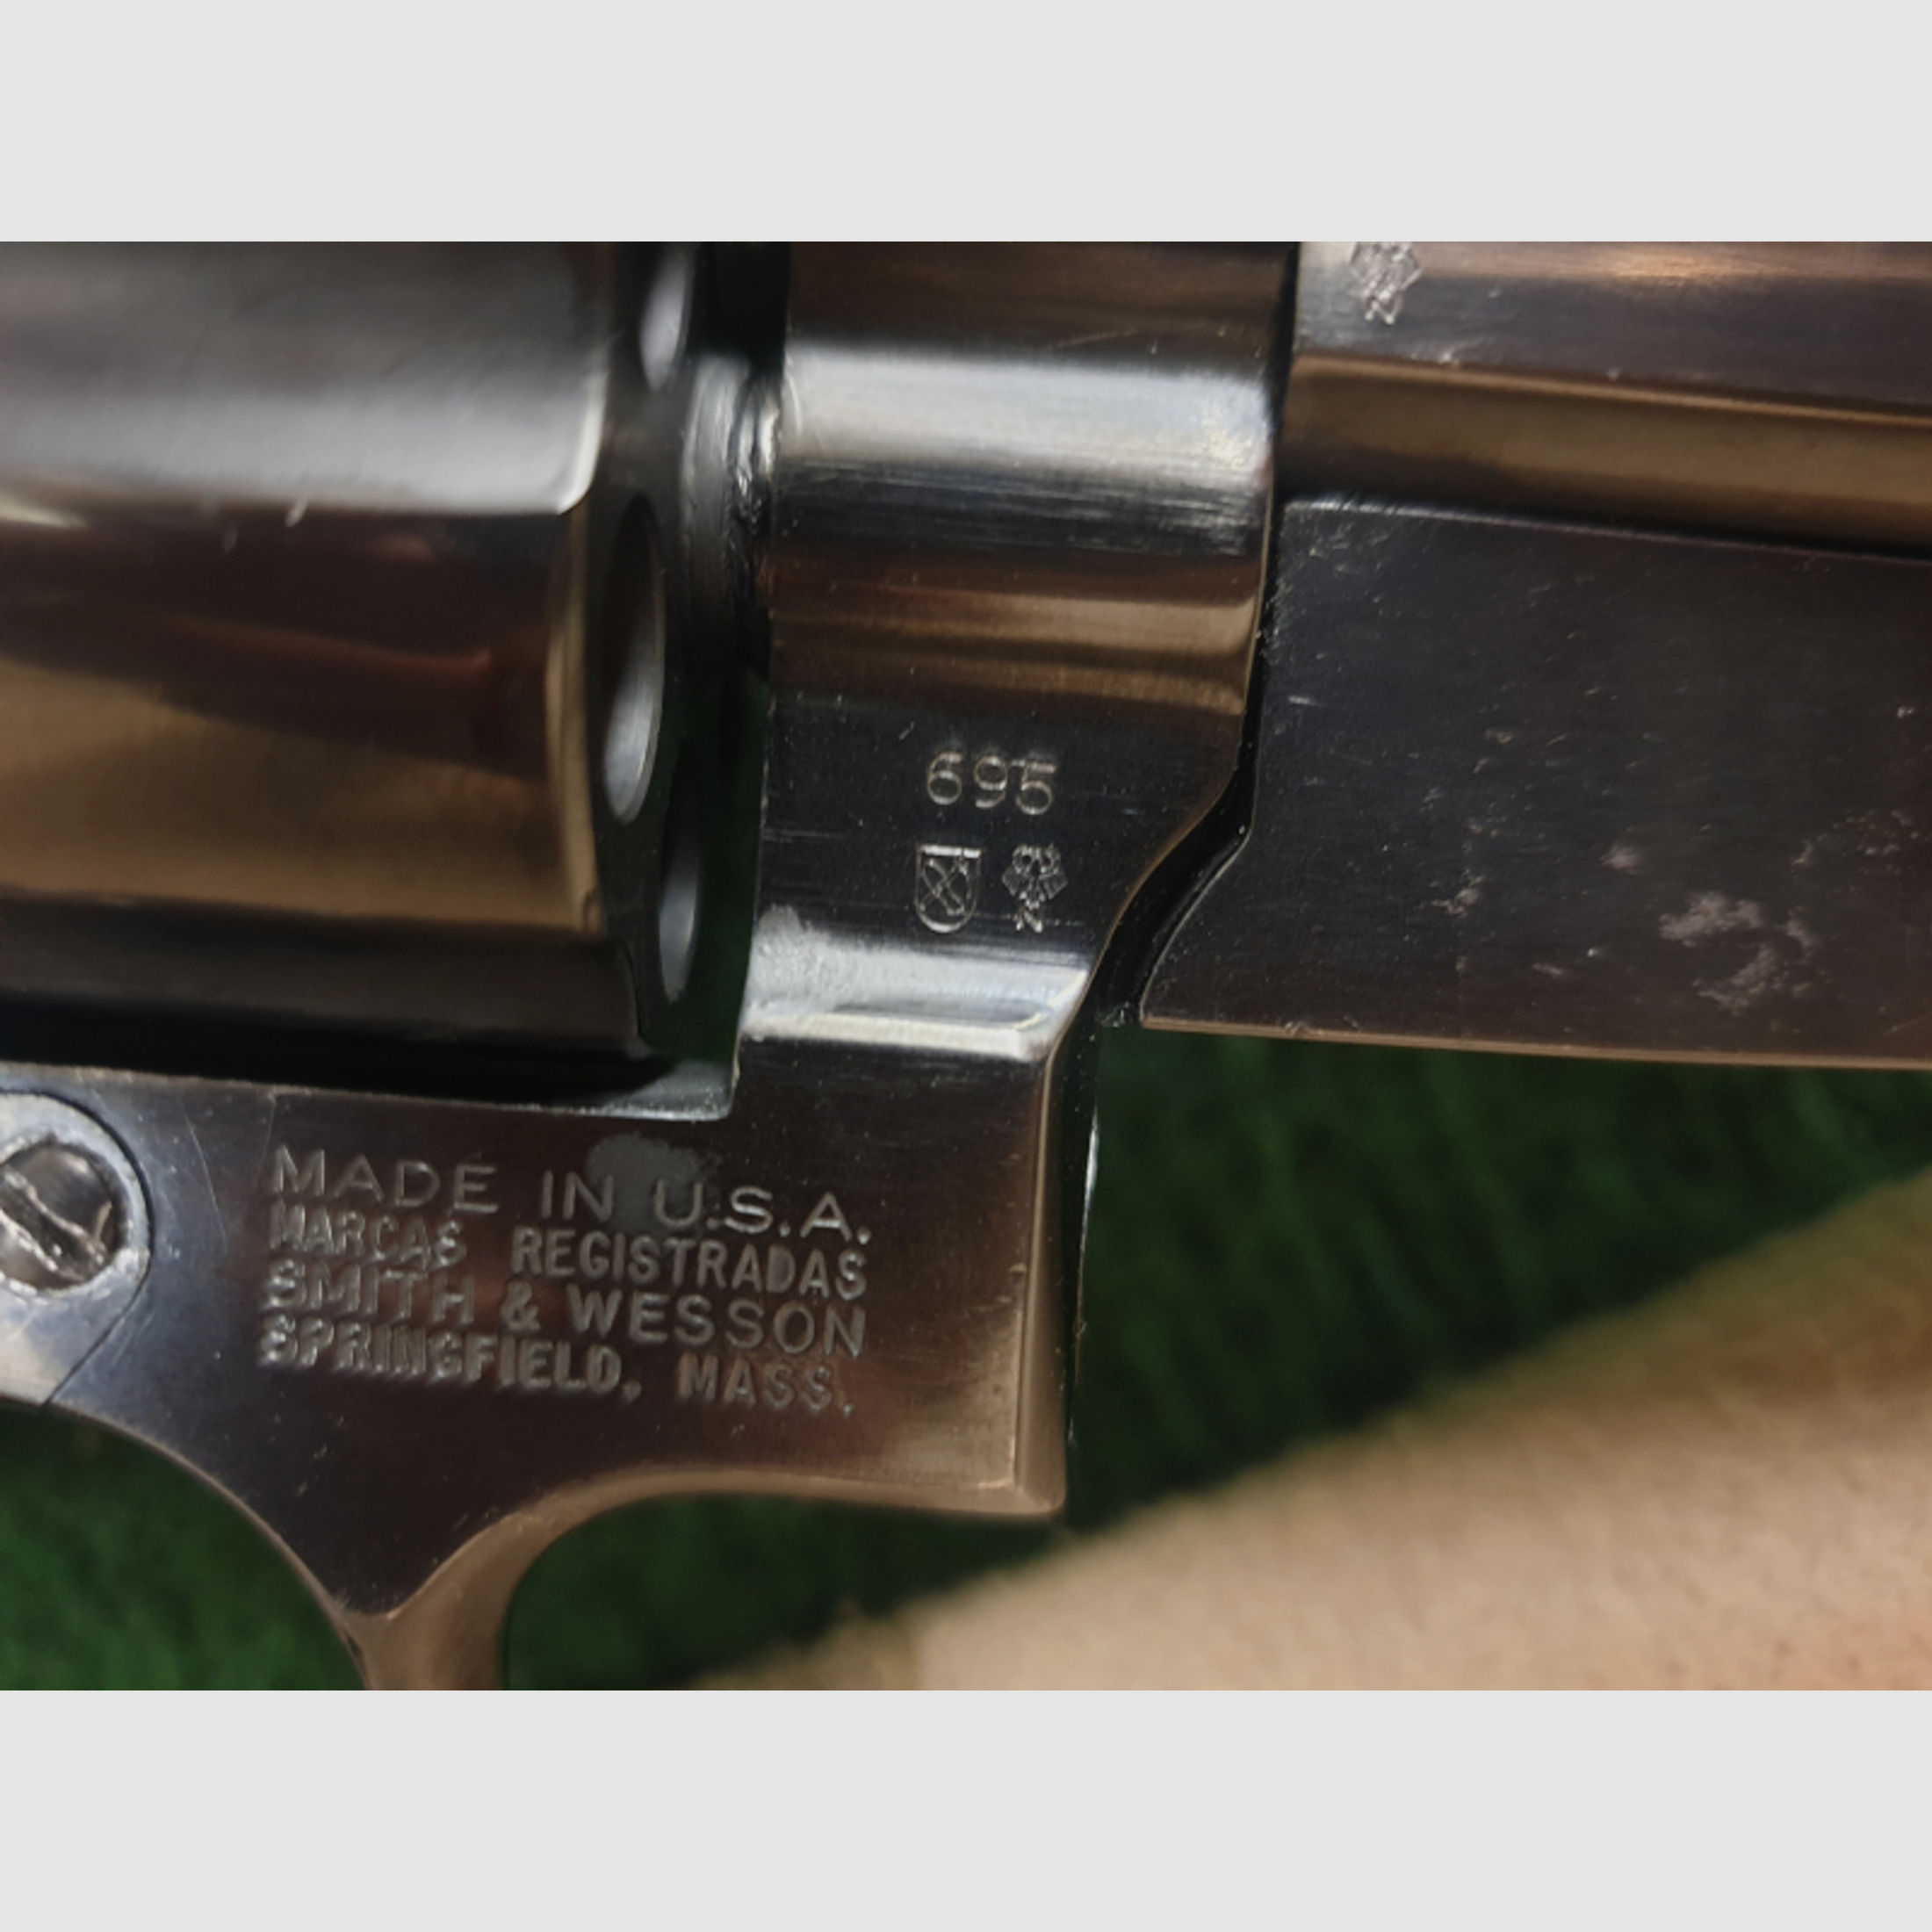 Smith & Wesson Mod.: 586-3 Kal.: .357 Mag Holden Tuning